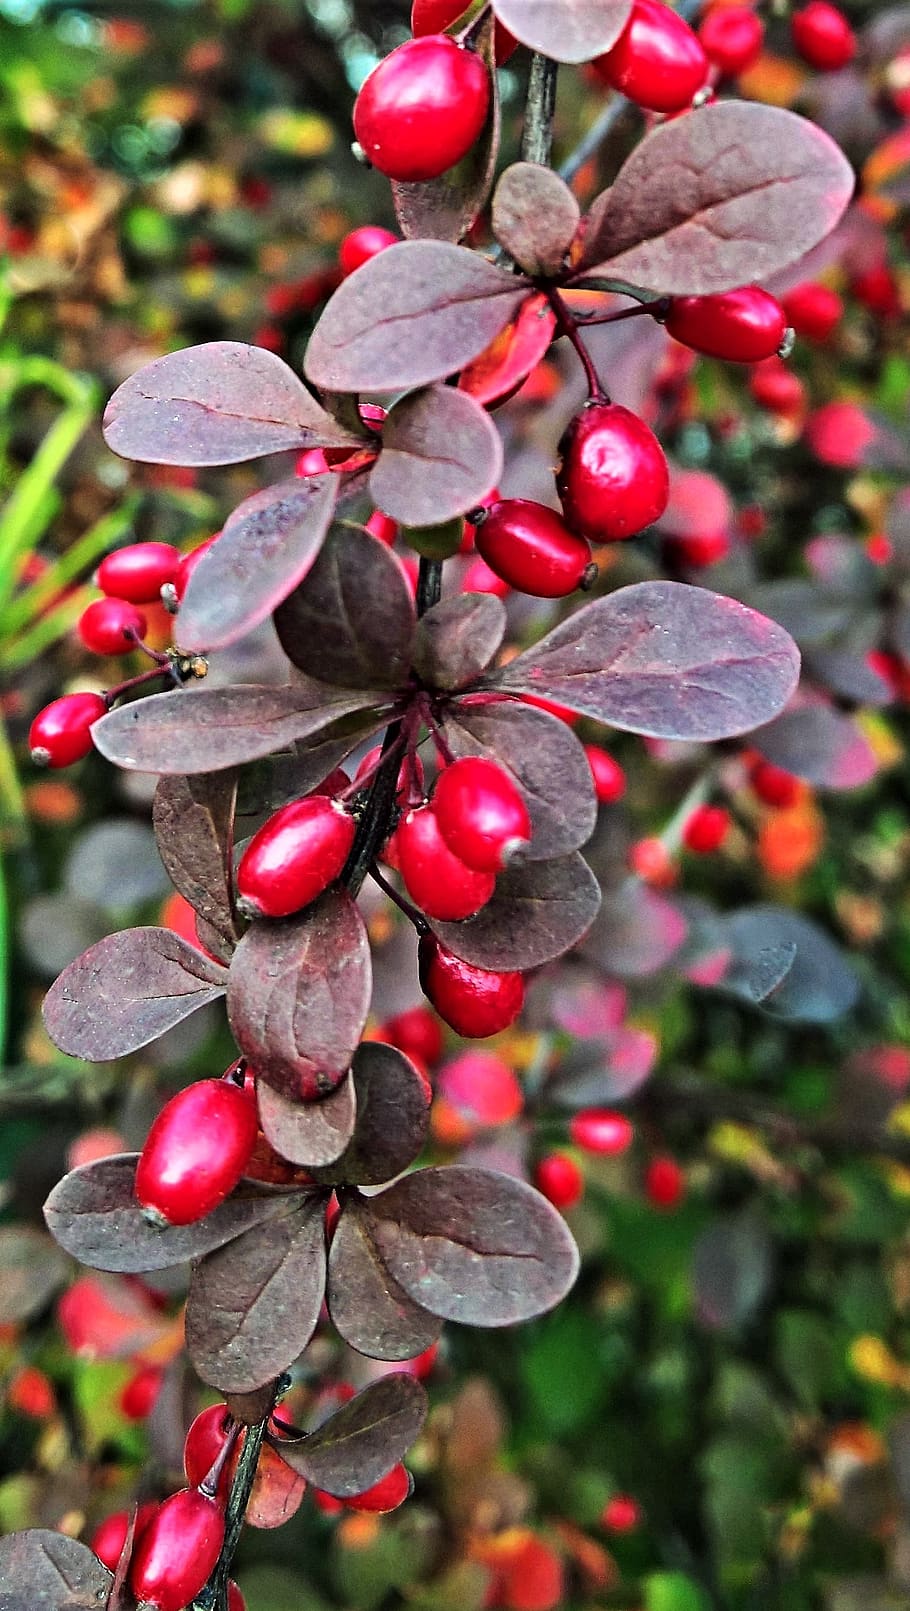 plant, hawthorn, berry red, autumn, shiny, hedge plant, bush, red leaves, thorns, nature